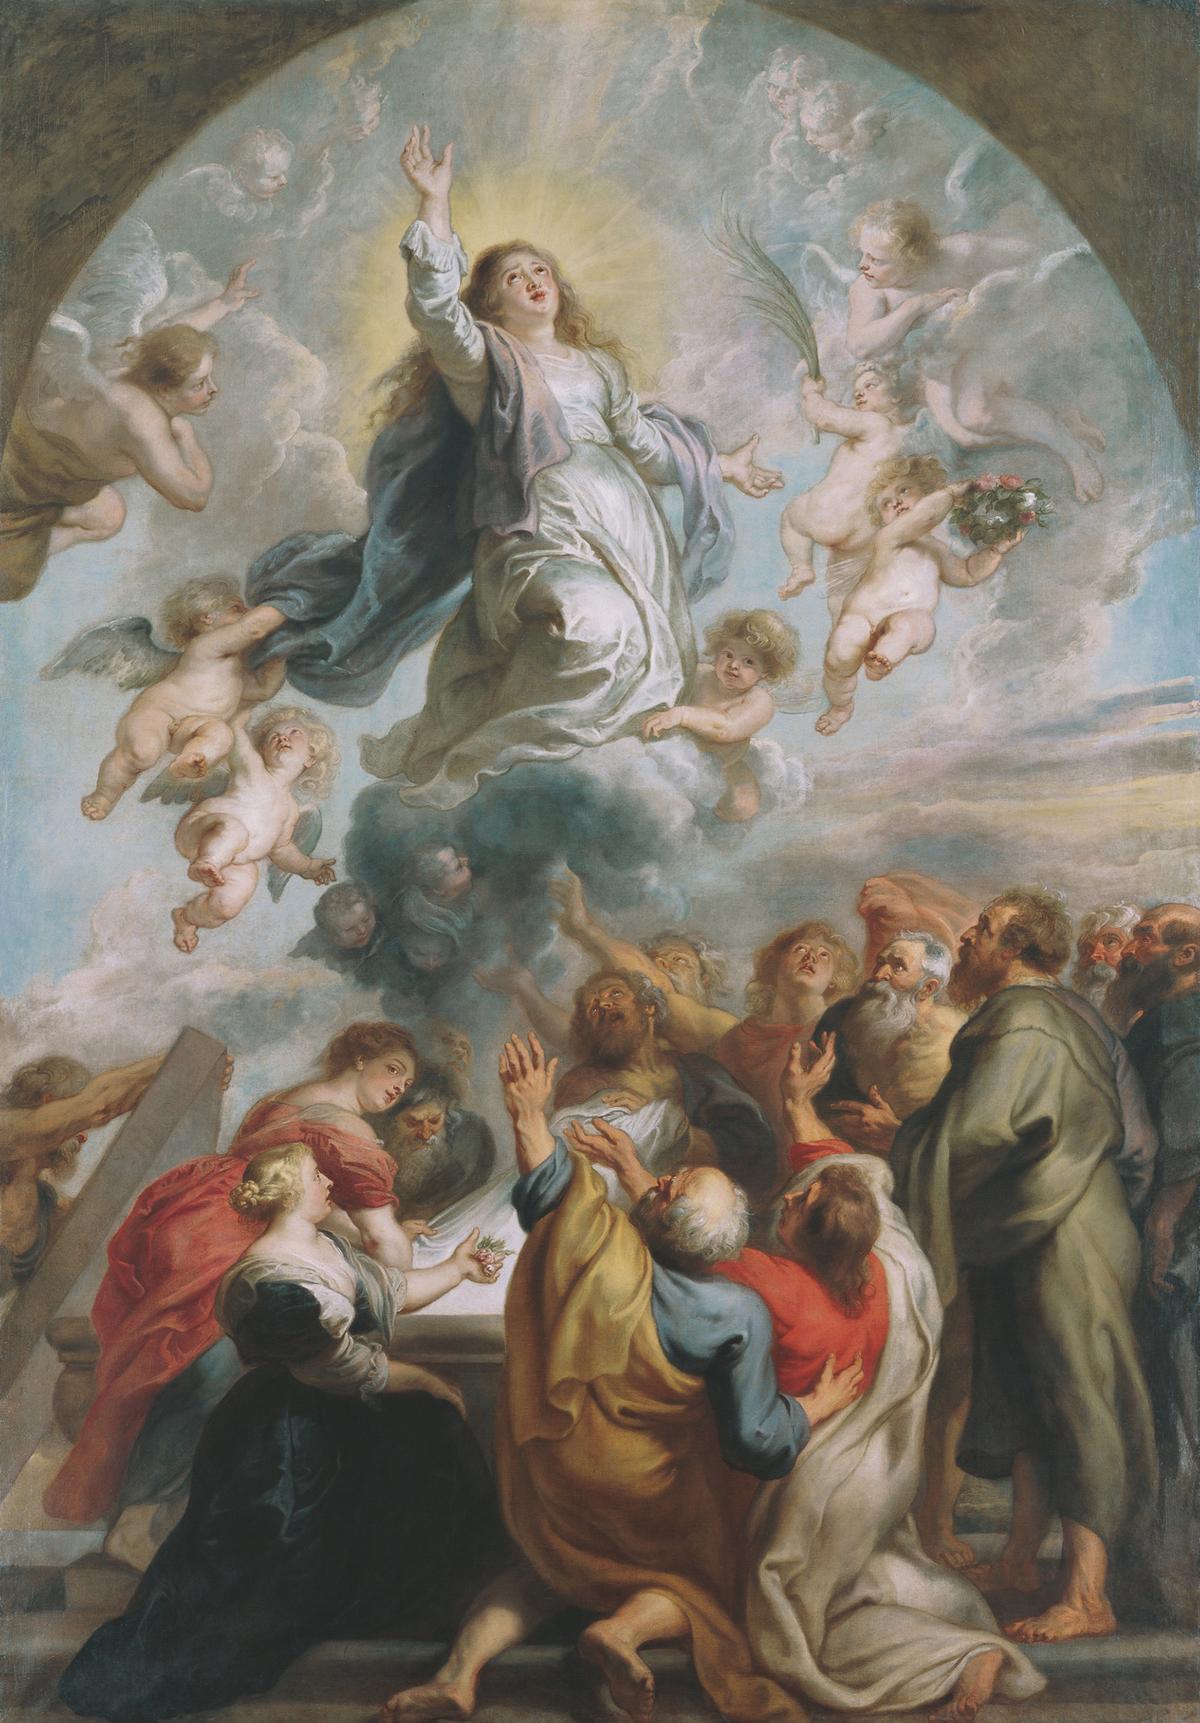 The very question of “How can I be saved?” implies that human beings cannot save themselves. “Assumption of Mary,” circa 1637, by Peter Paul Rubens. Liechtenstein Collections; Liechtenstein Museum, Vienna, Austria. (Public Domain)